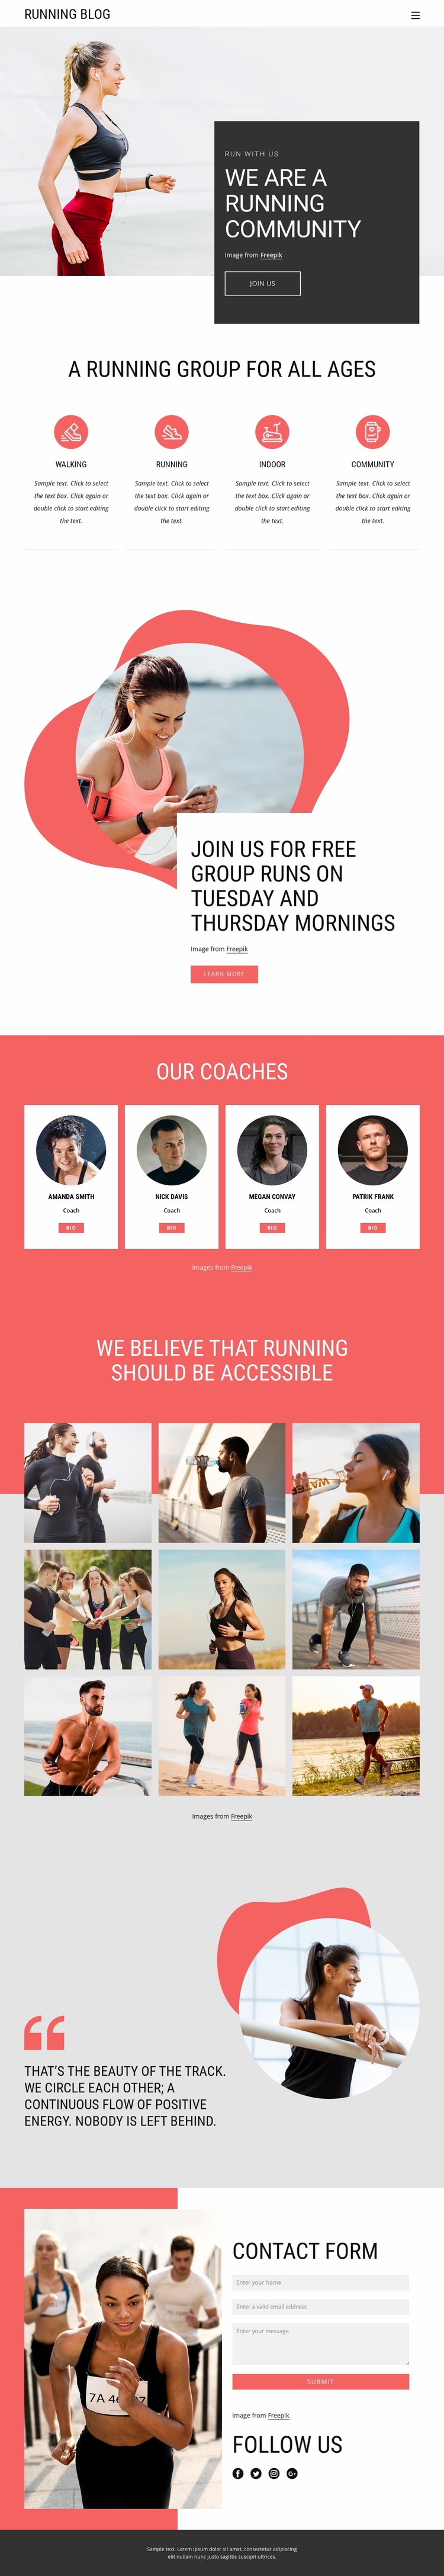 The Benefits of joining a run club Website Design